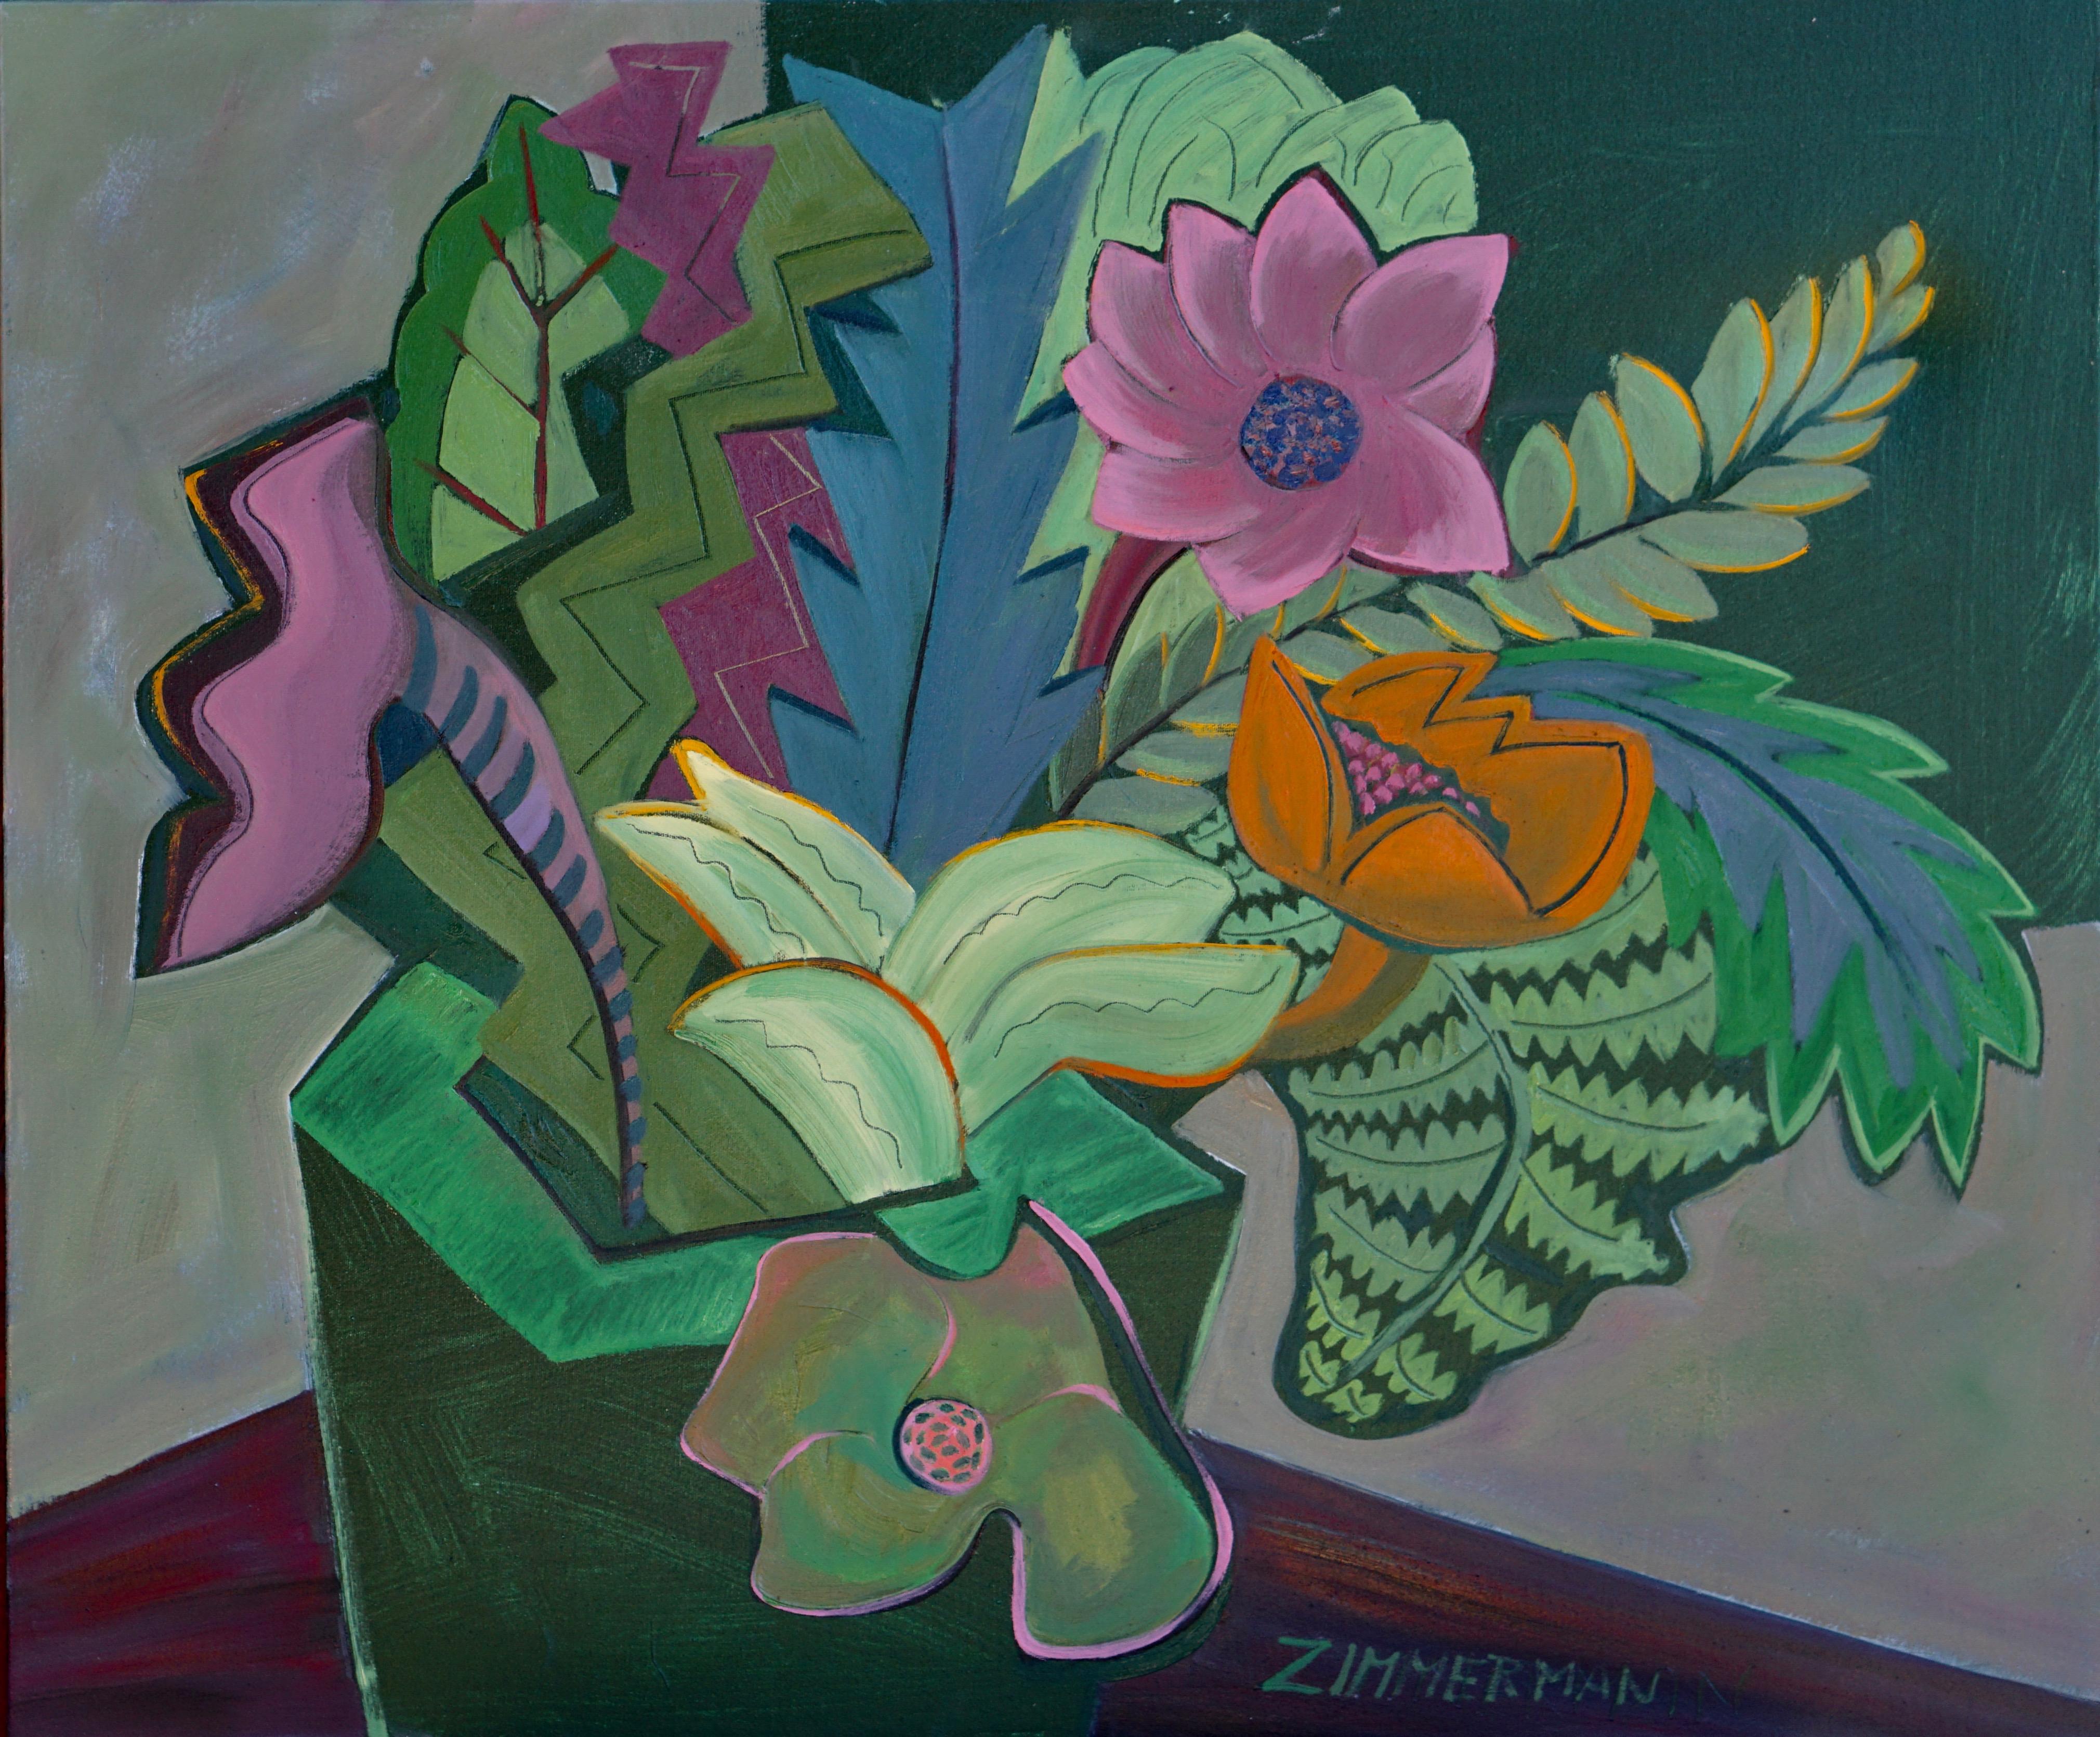 A painting of abundant abstract florals is inventive and colorful bringing a verdant jungle to the viewer.

Tropical Fantasy #7 - Still-life Painting - Oil Paint By Marc Zimmerman

This masterpiece is exhibited in the Zimmerman Gallery, Carmel